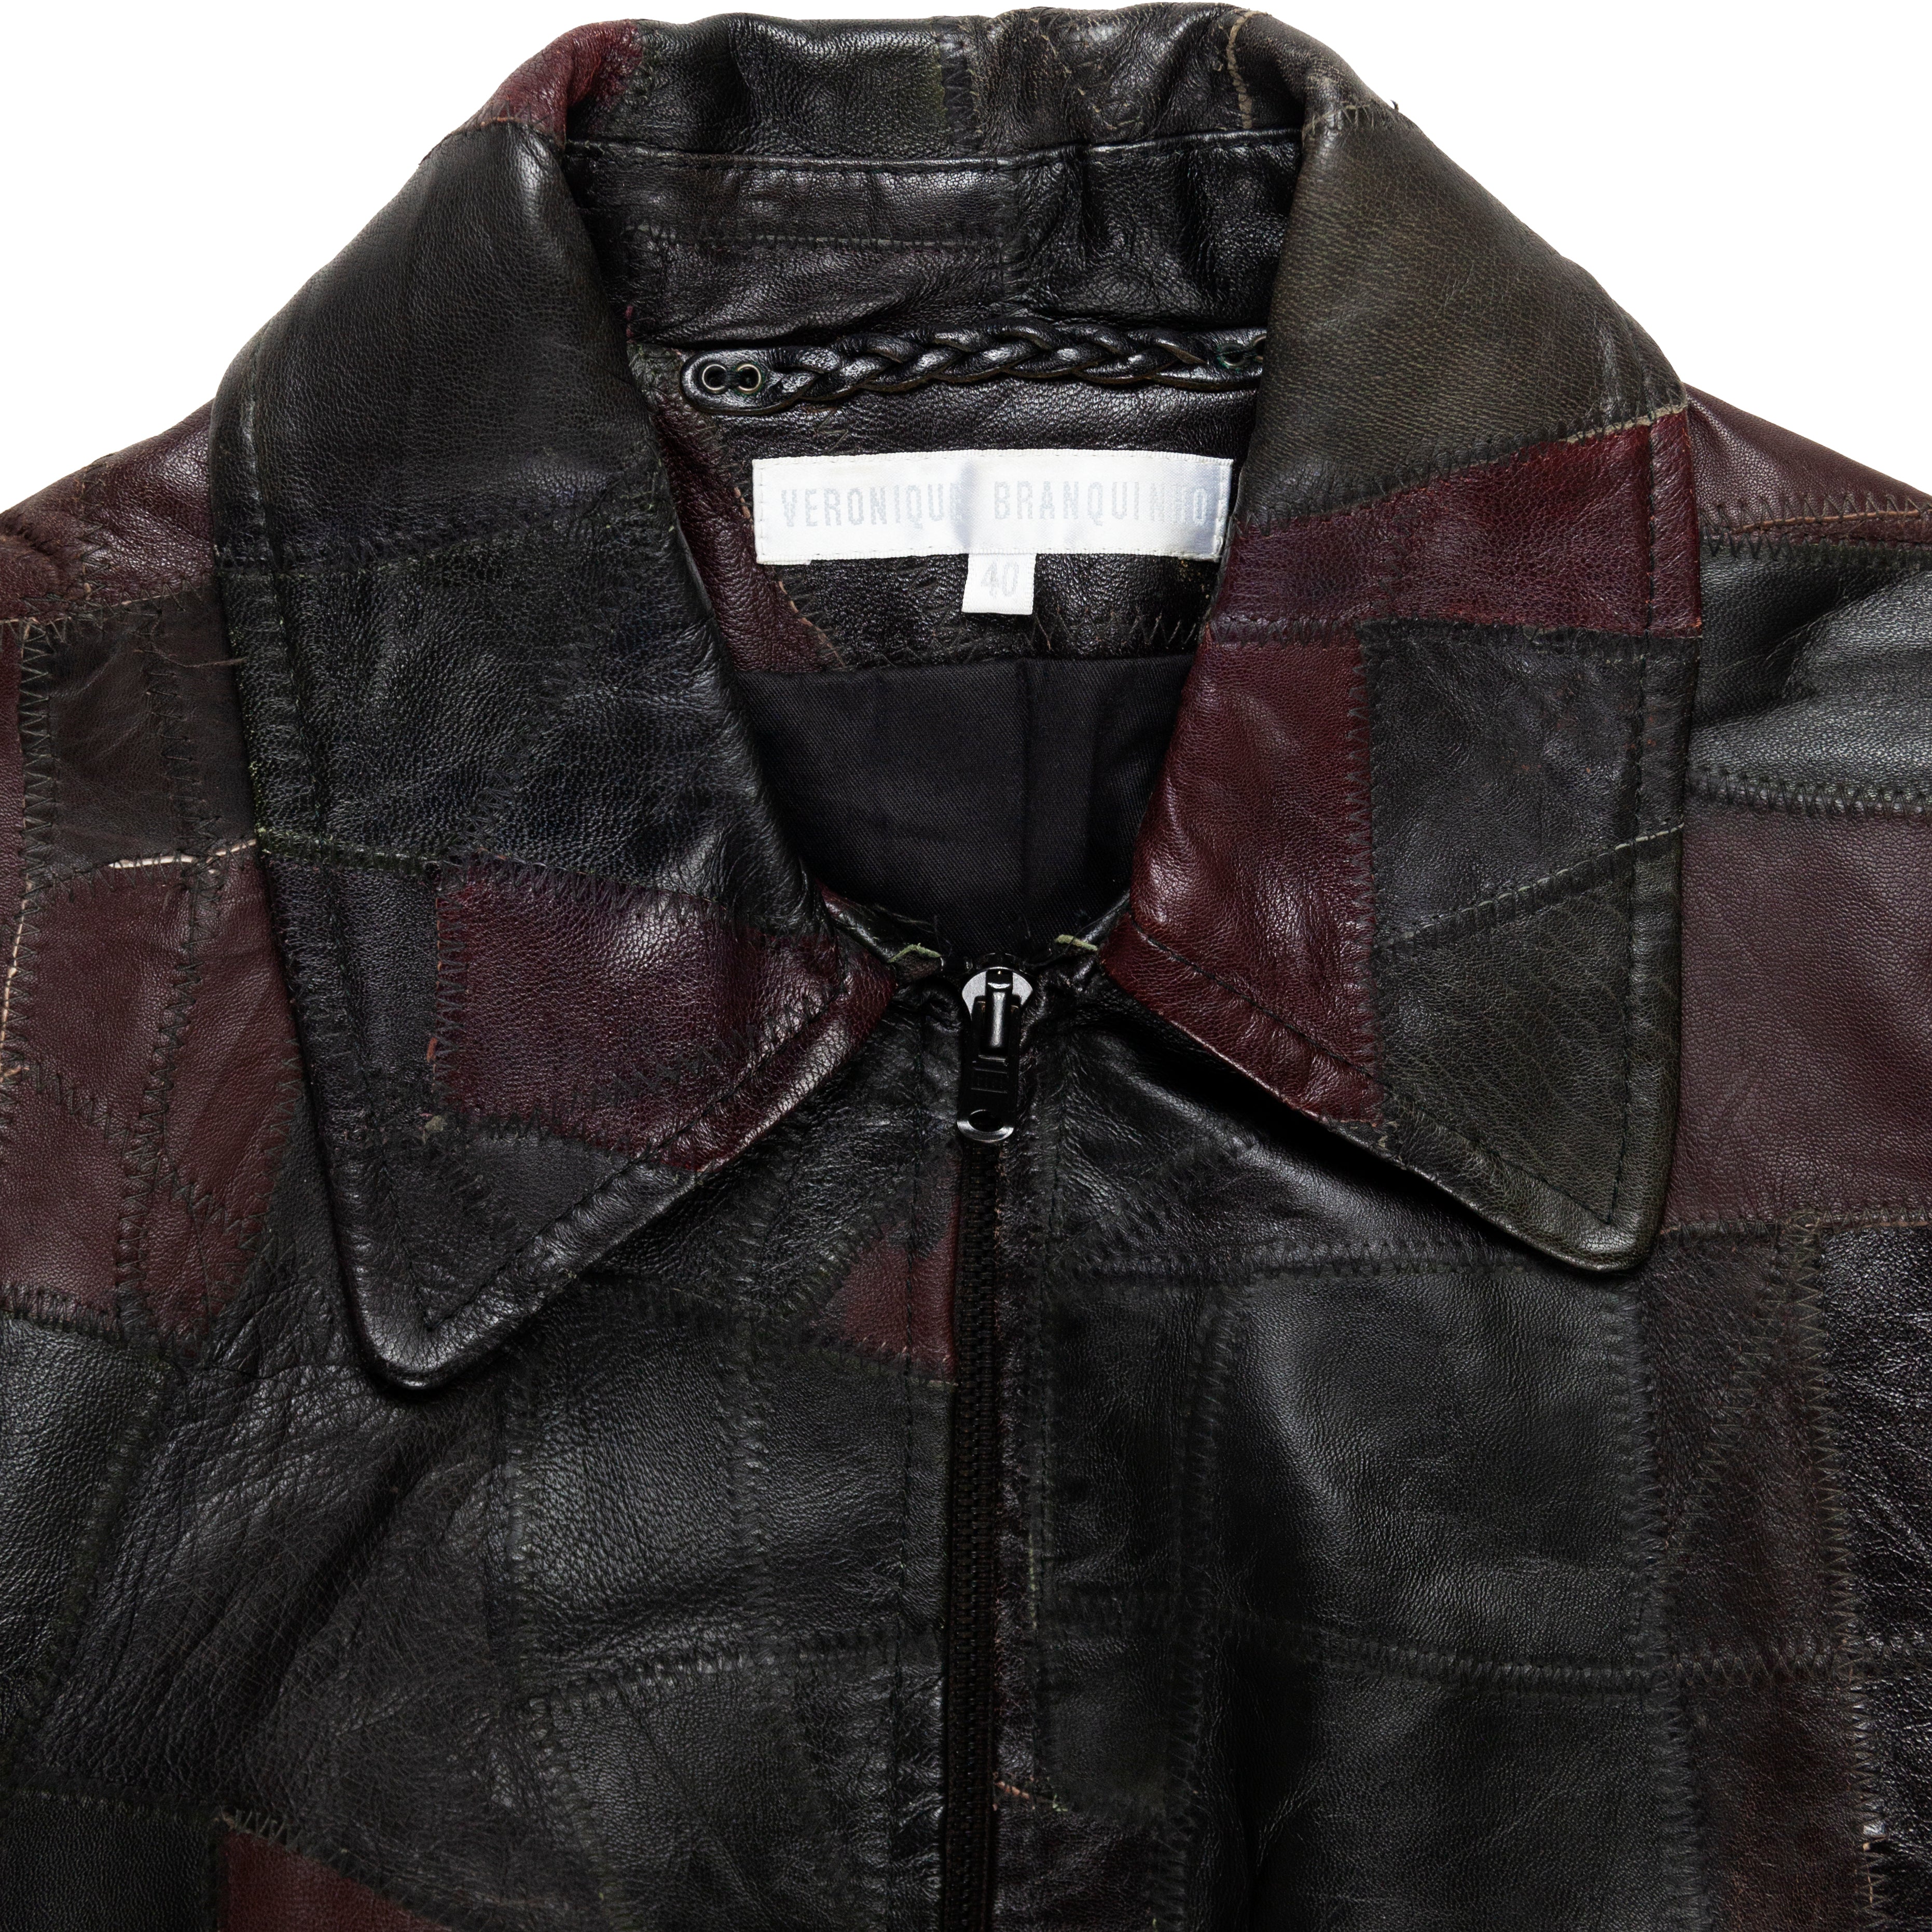 VERONIQUE BRANQUINHO RECONSTRUCTED LEATHER JACKET - AW01 - SILVER